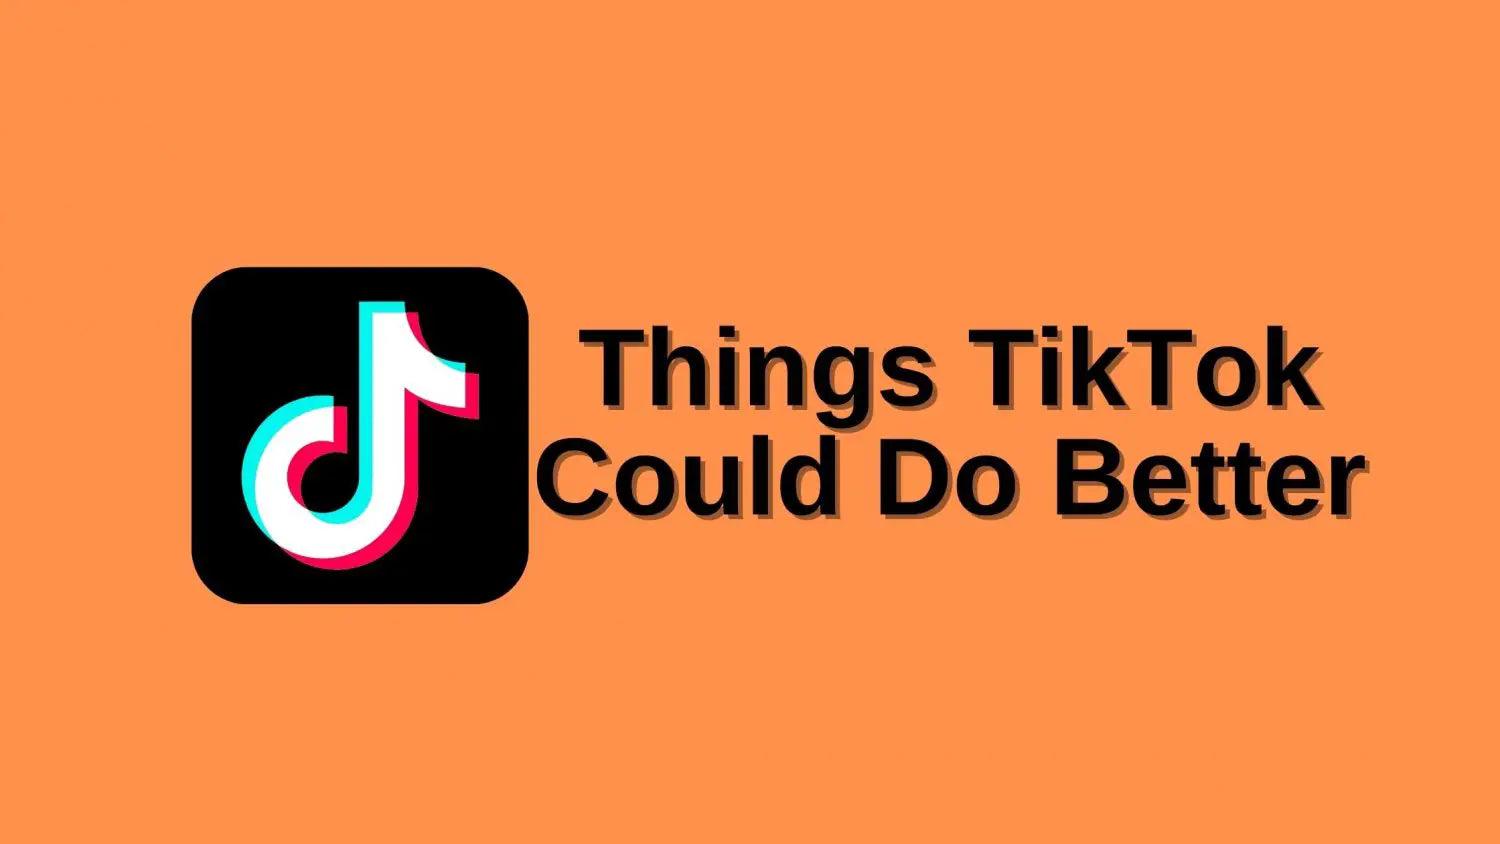 thing tiktok could improve;replying to comments on TikTok with videos